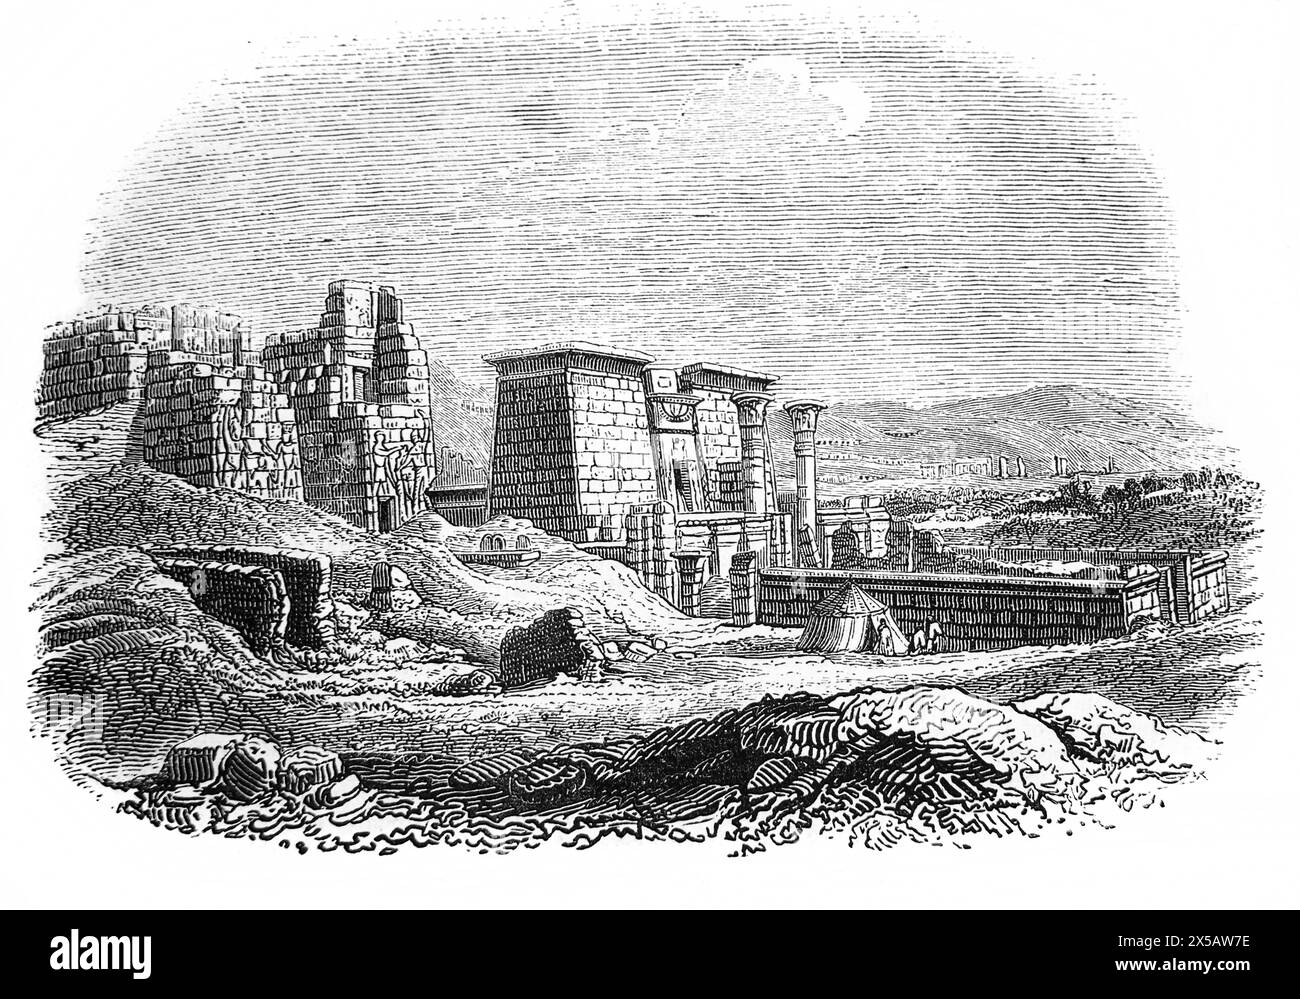 Wood Engraving of No (No-Amon) Biblical City Capital of Ancient Egypt Medinet Abou (Habu) from 19th Century Illustrated Family Bible Stock Photo